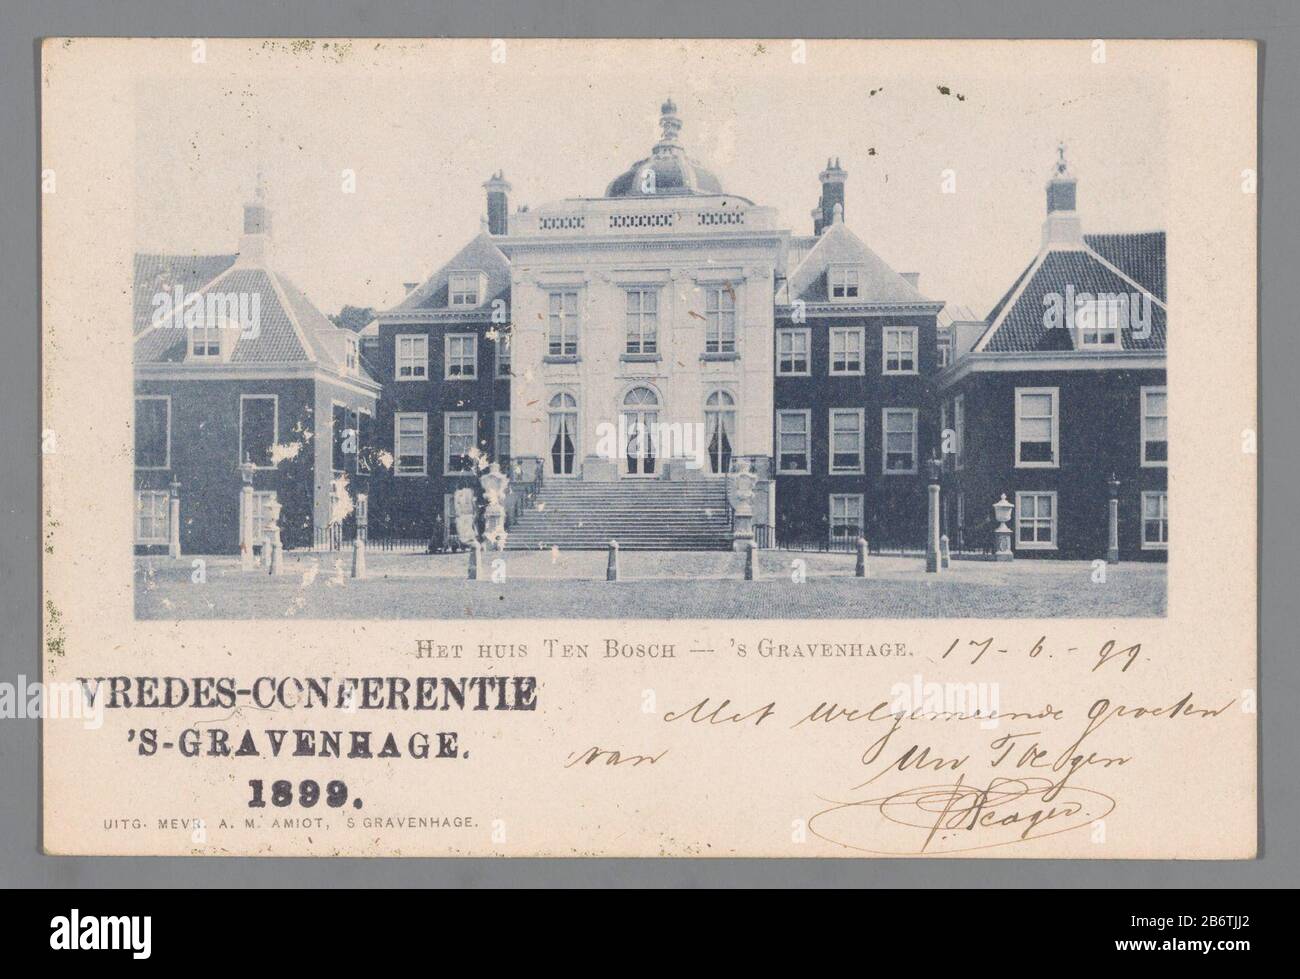 Het huis Ten Bosch - 's Gravenhage (titel op object) House Ten Bosch - The Hague (title object) Property Type: photomechanical print postcard Item number: RP-F F19675 Inscriptions / Brands: inscription, recto, stamped: 'PEACE CONFERENCE / 'S GRAVE HAGE. / 1899.' Manufacturer : creator: anonymous publisher: AM Amiot (listed property) Place manufacture: Den Haag Date: Jun 17 1899 Material: Cardboard Technique: copying / write sizes: Cardboard: H 93 mm × W 137 mm Subject: palace where: Huis ten Bosch Stock Photo